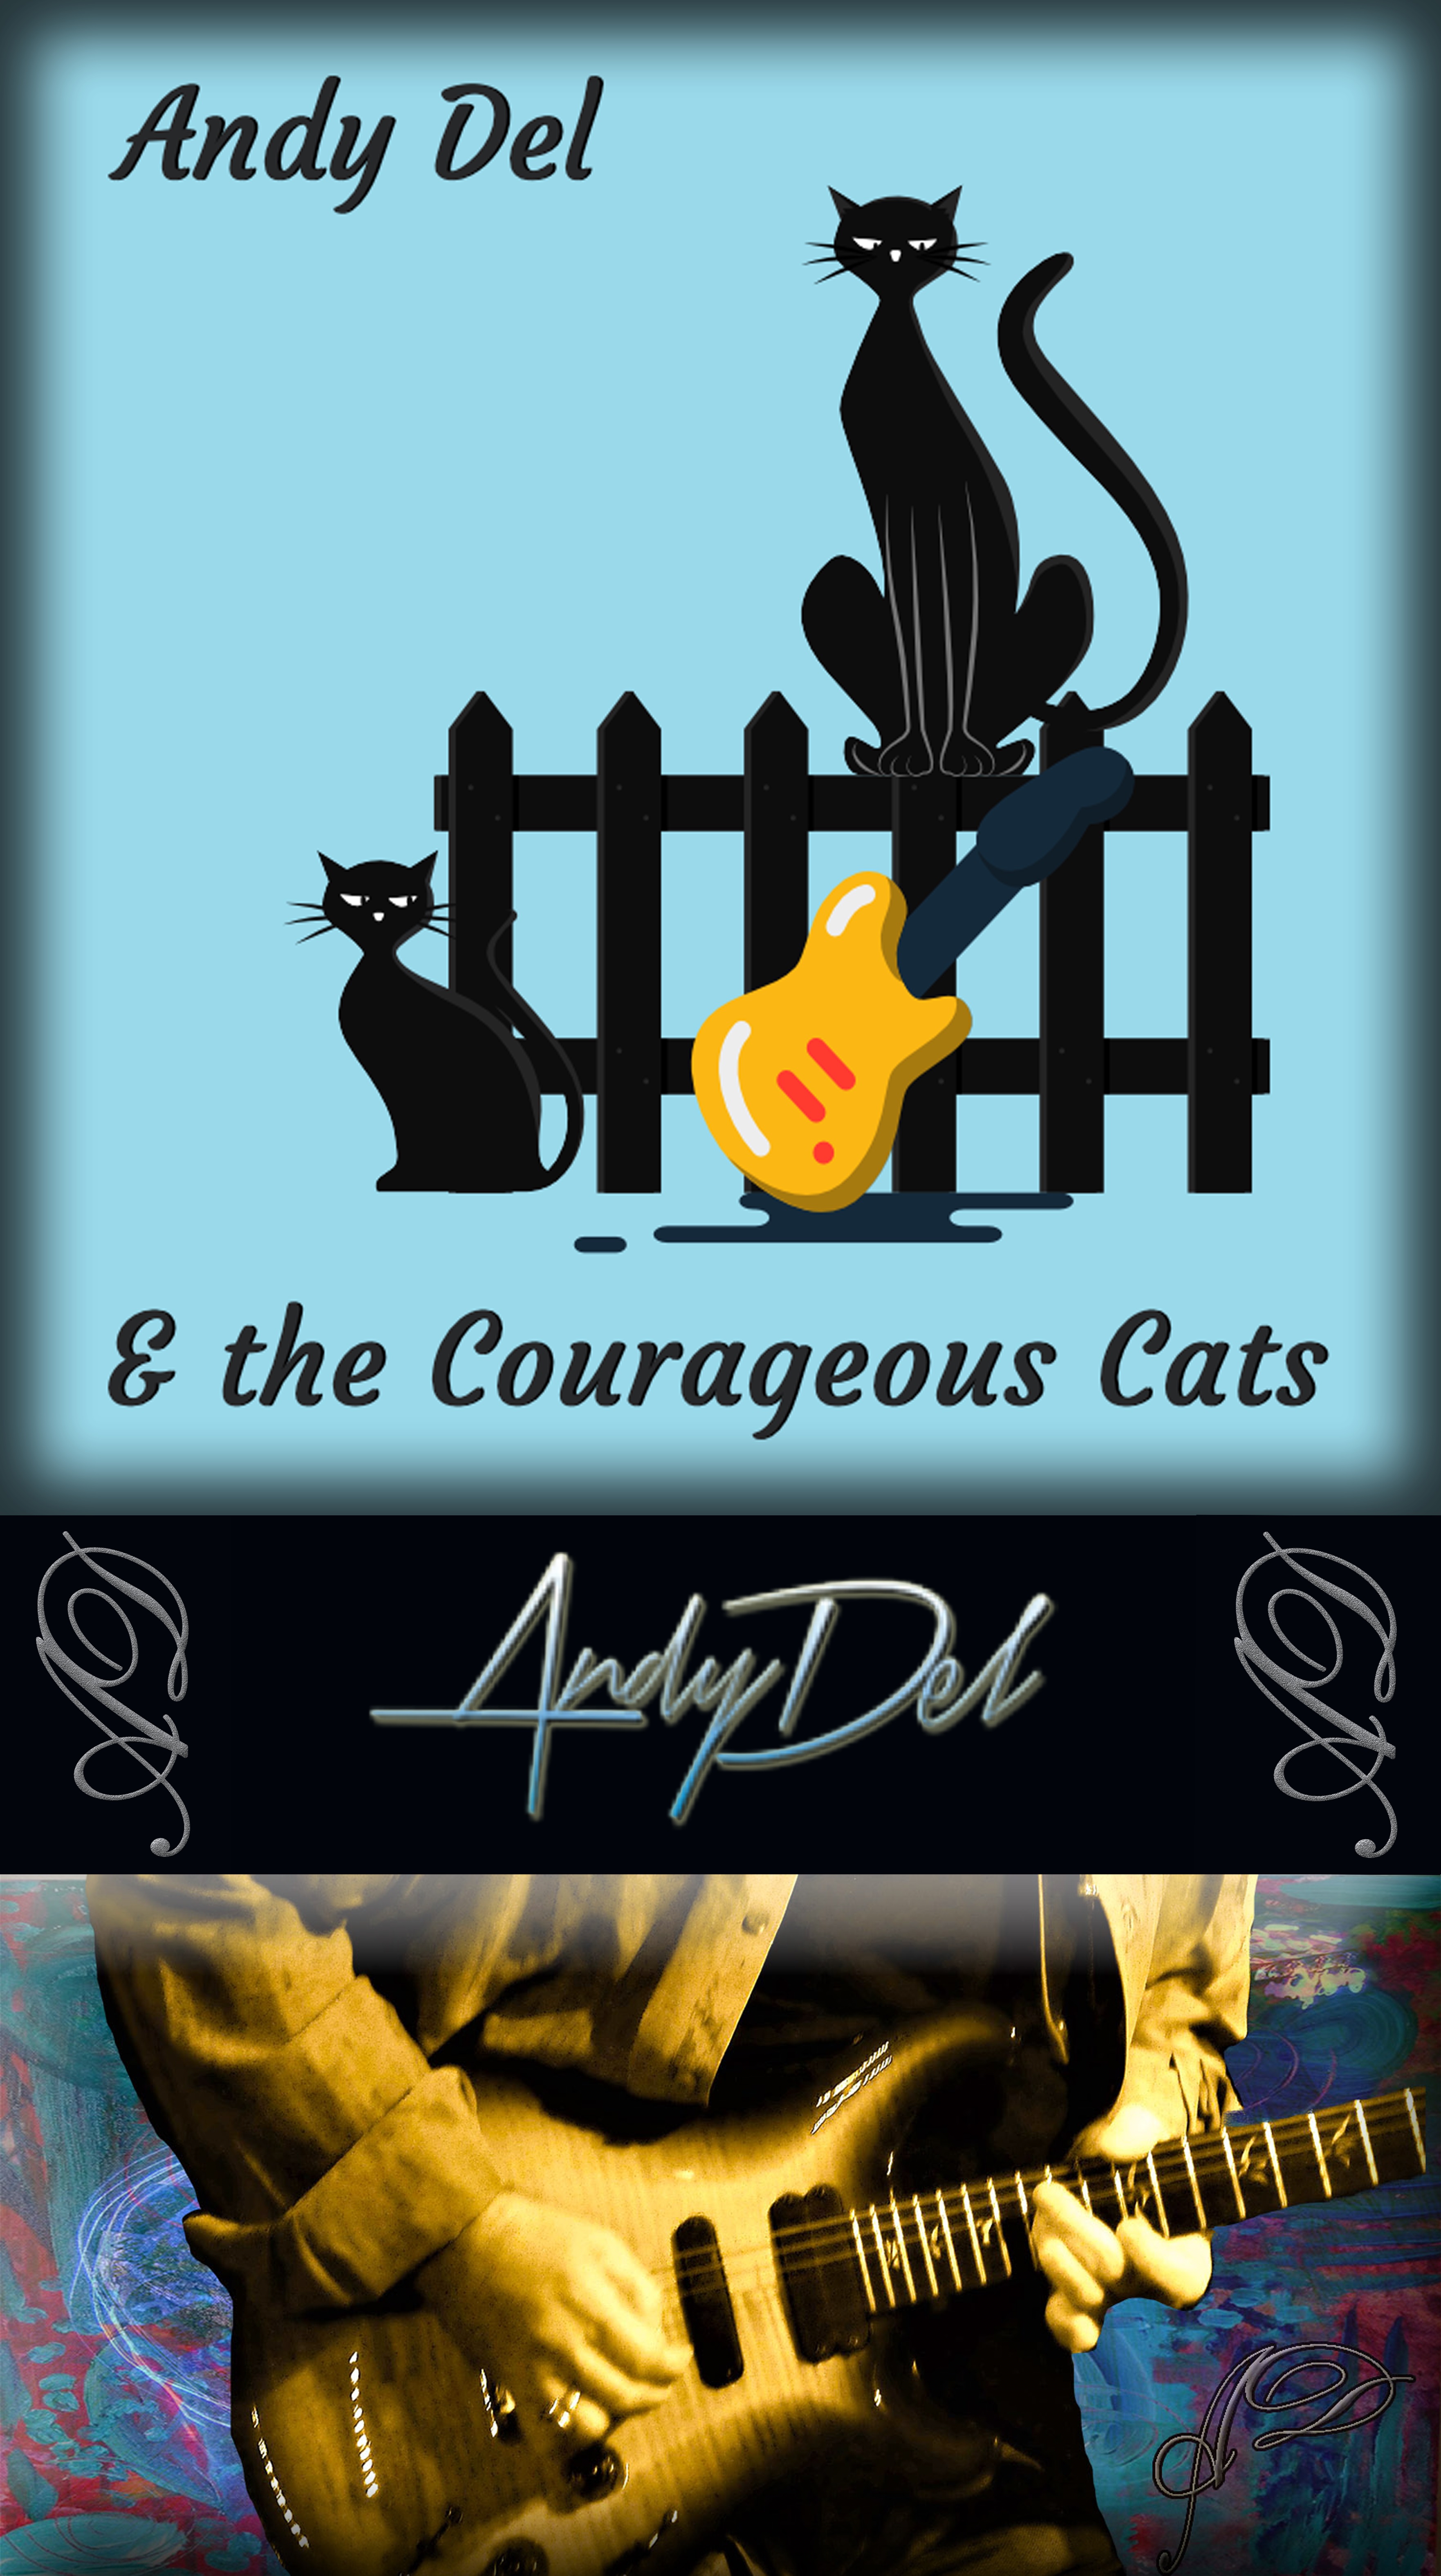 Andy Del and the Courageous Cats at Margaritas Cafe in Freeport - Friday, August 2nd